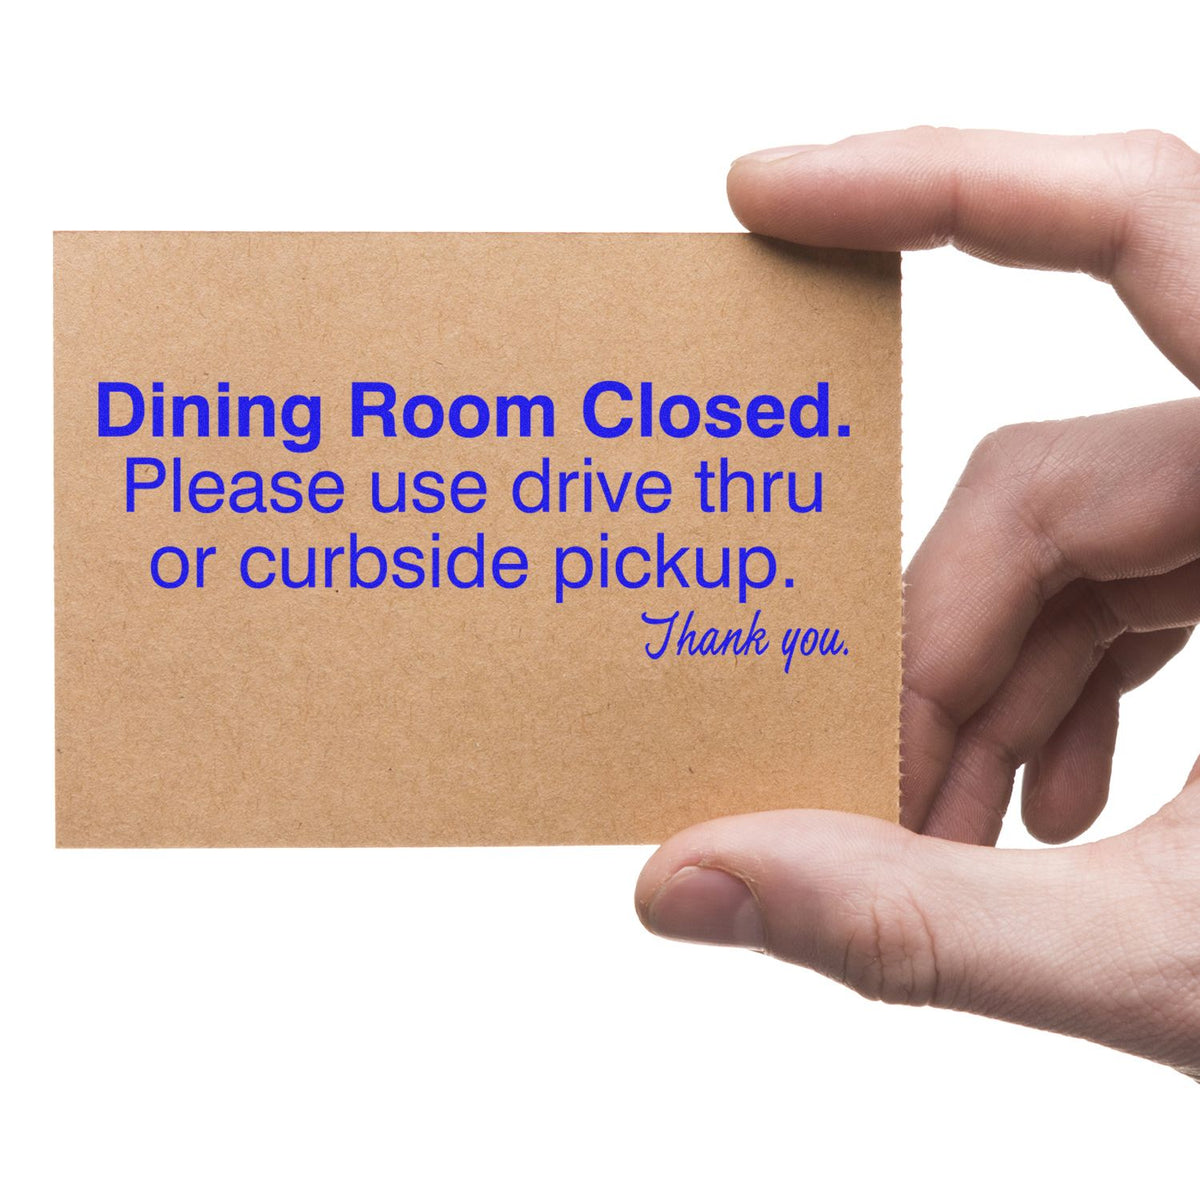 Large Pre-Inked Dining Room Closed Stamp In Use Photo